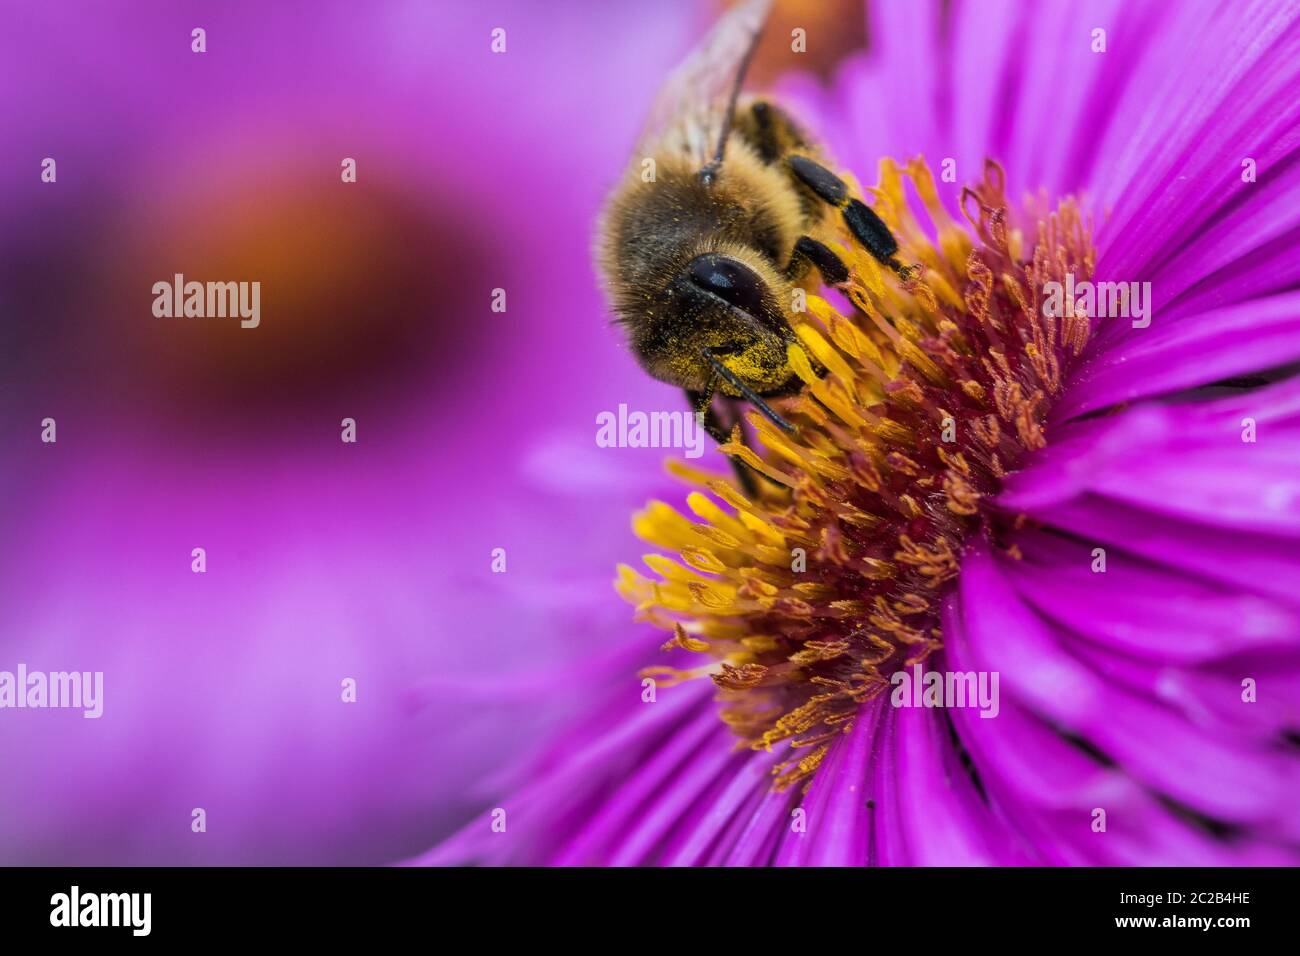 Bee in the middle of a purple bloom Stock Photo